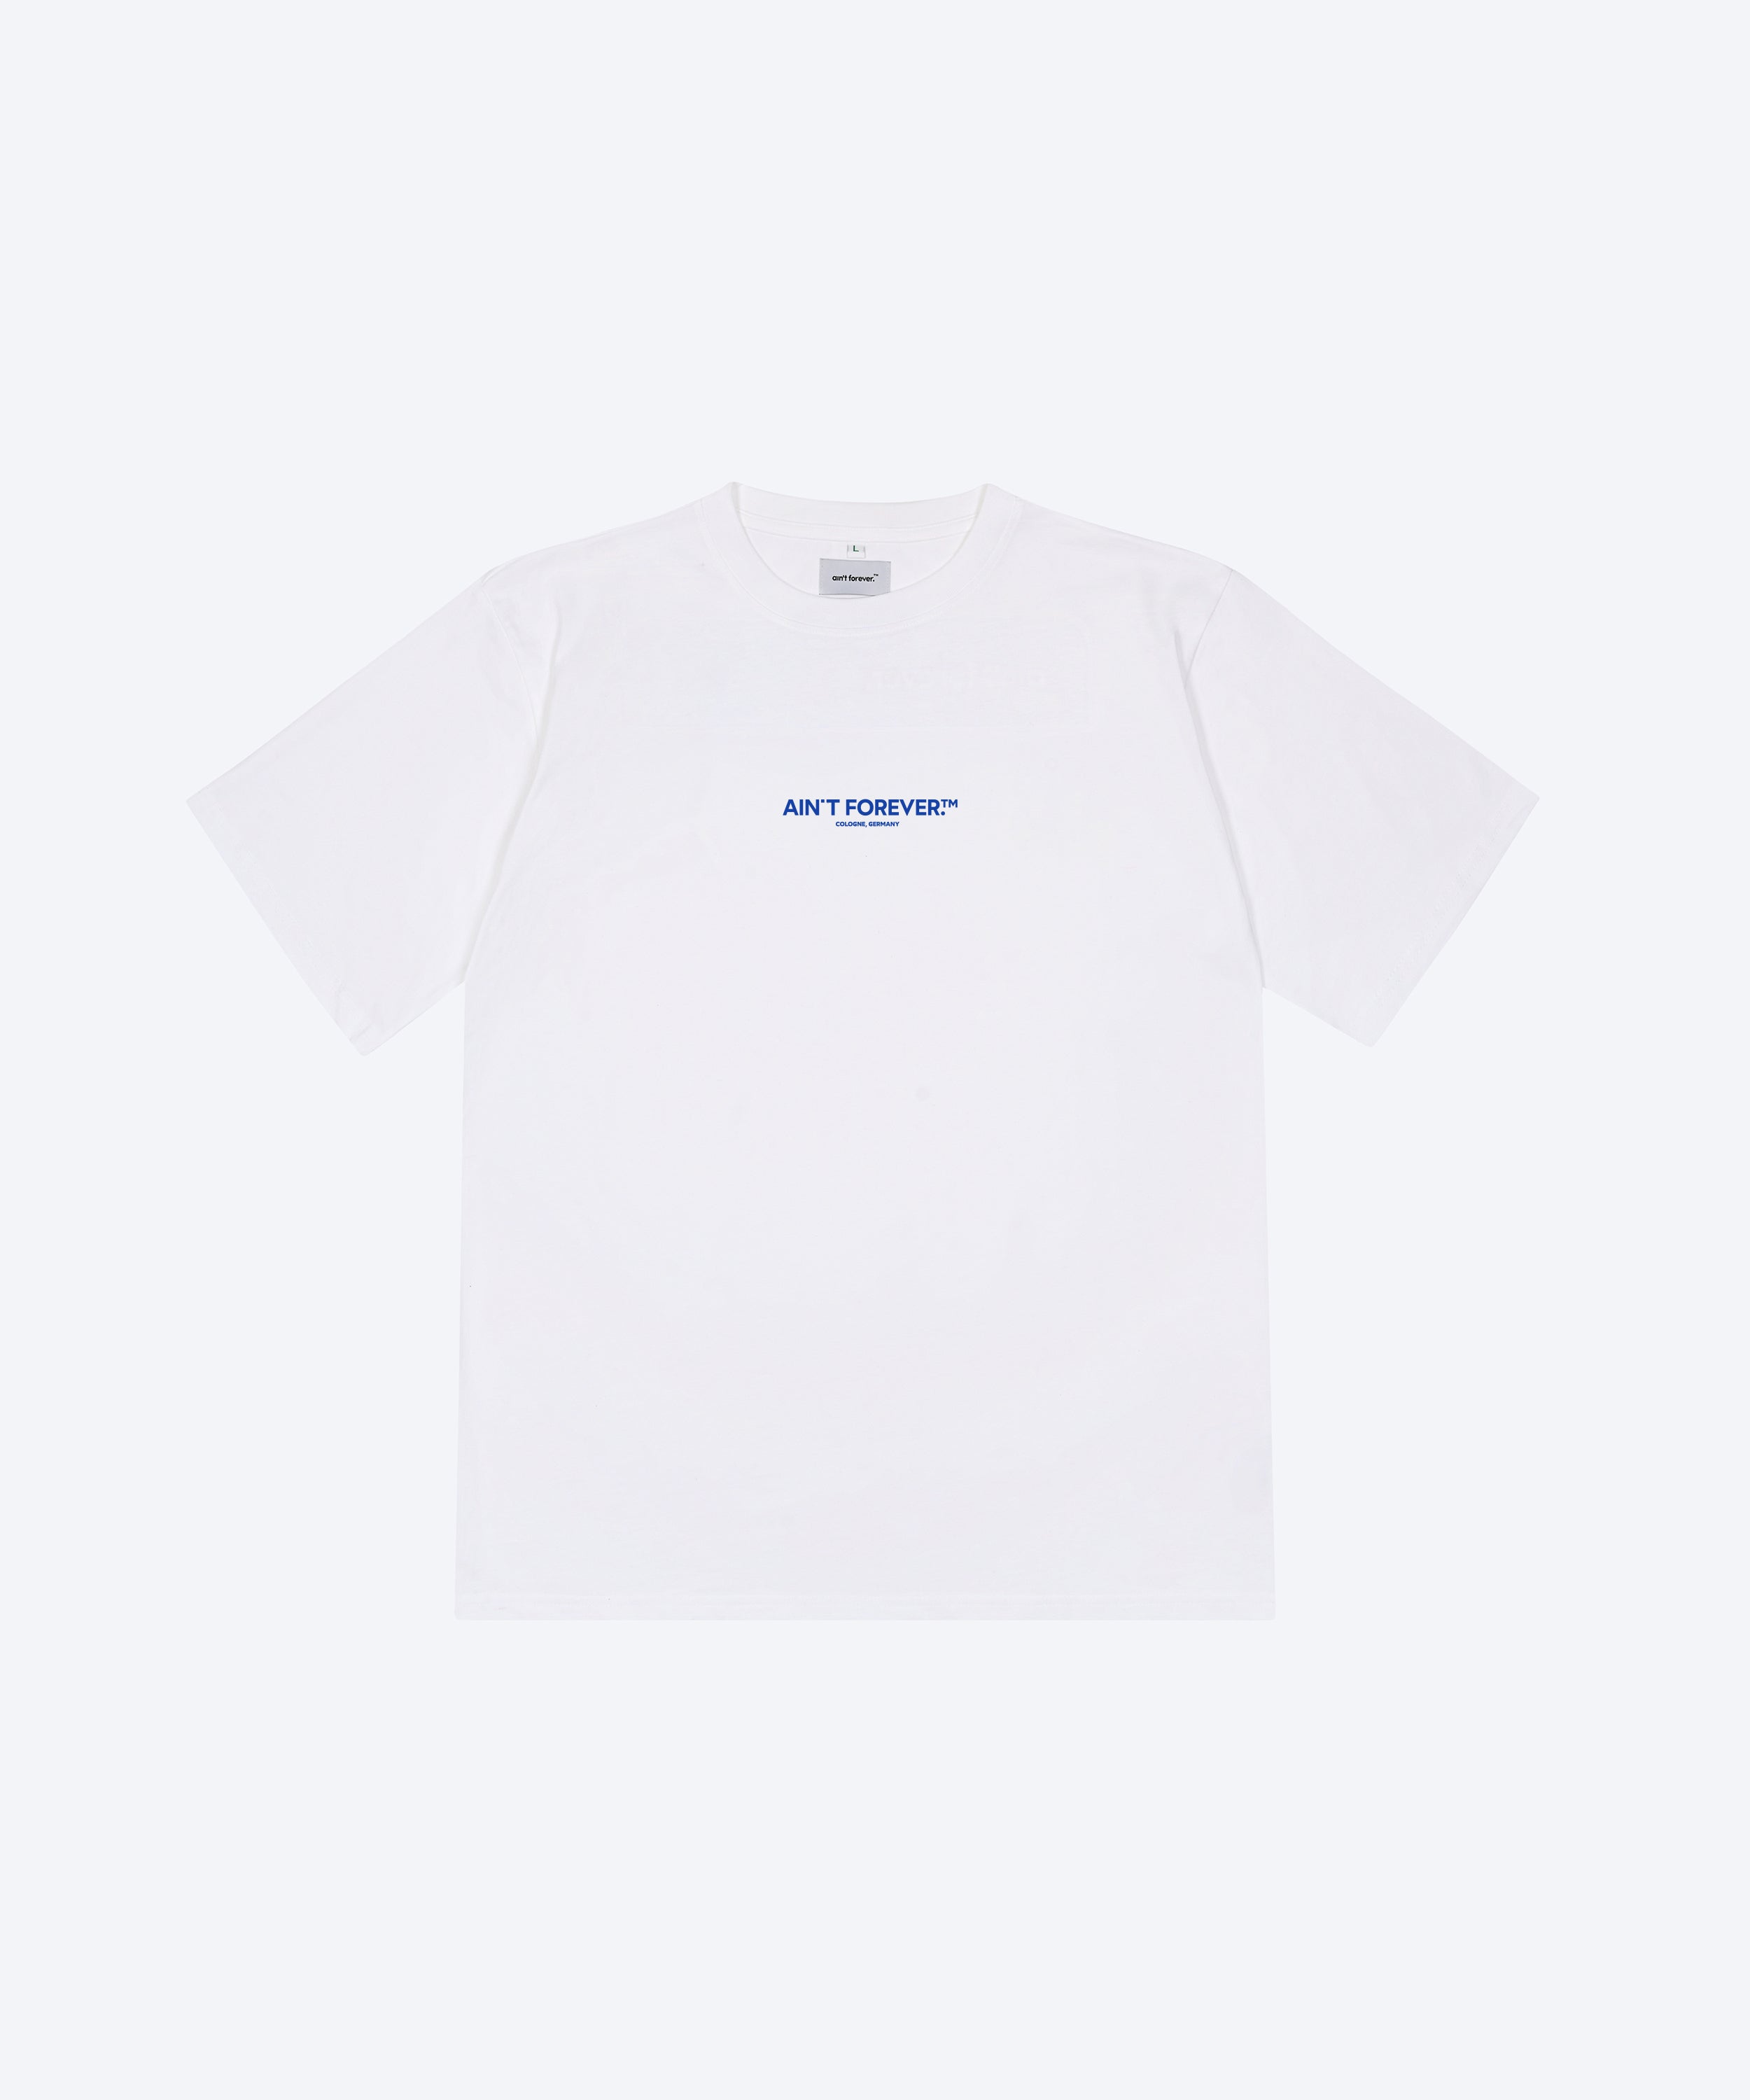 THE DEPARTURES T-SHIRT (WHITE / BLUE)